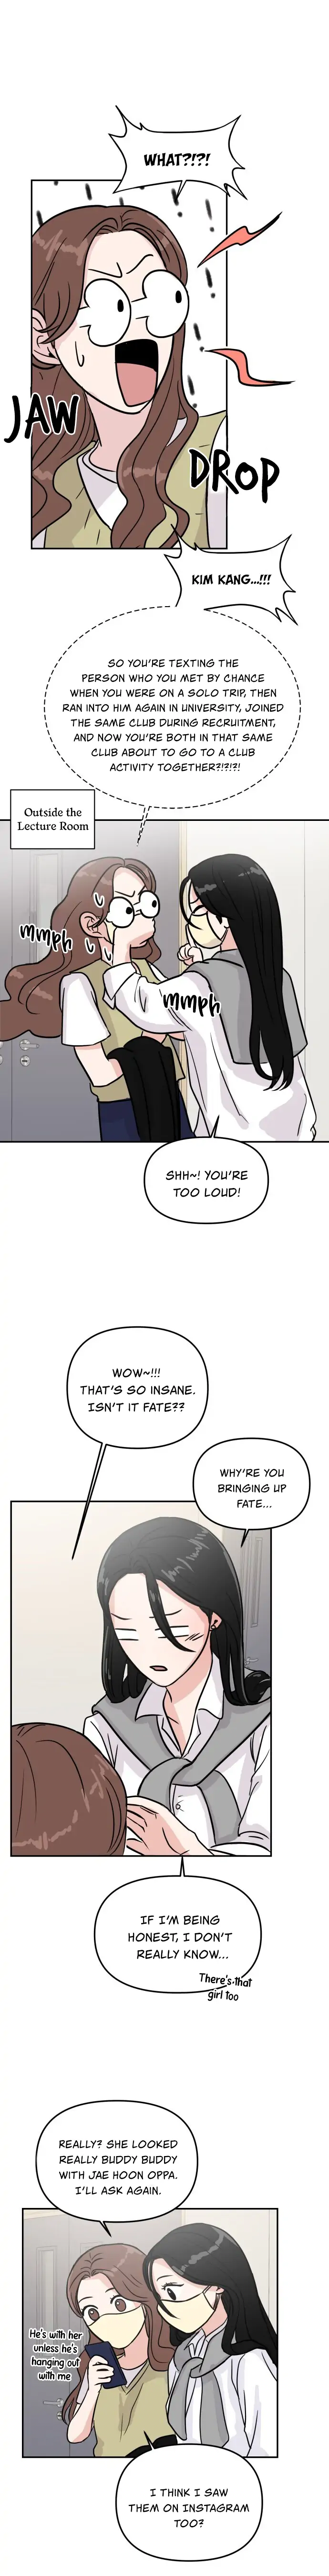 A Campus Romance, I Guess Chapter 6 - Page 3